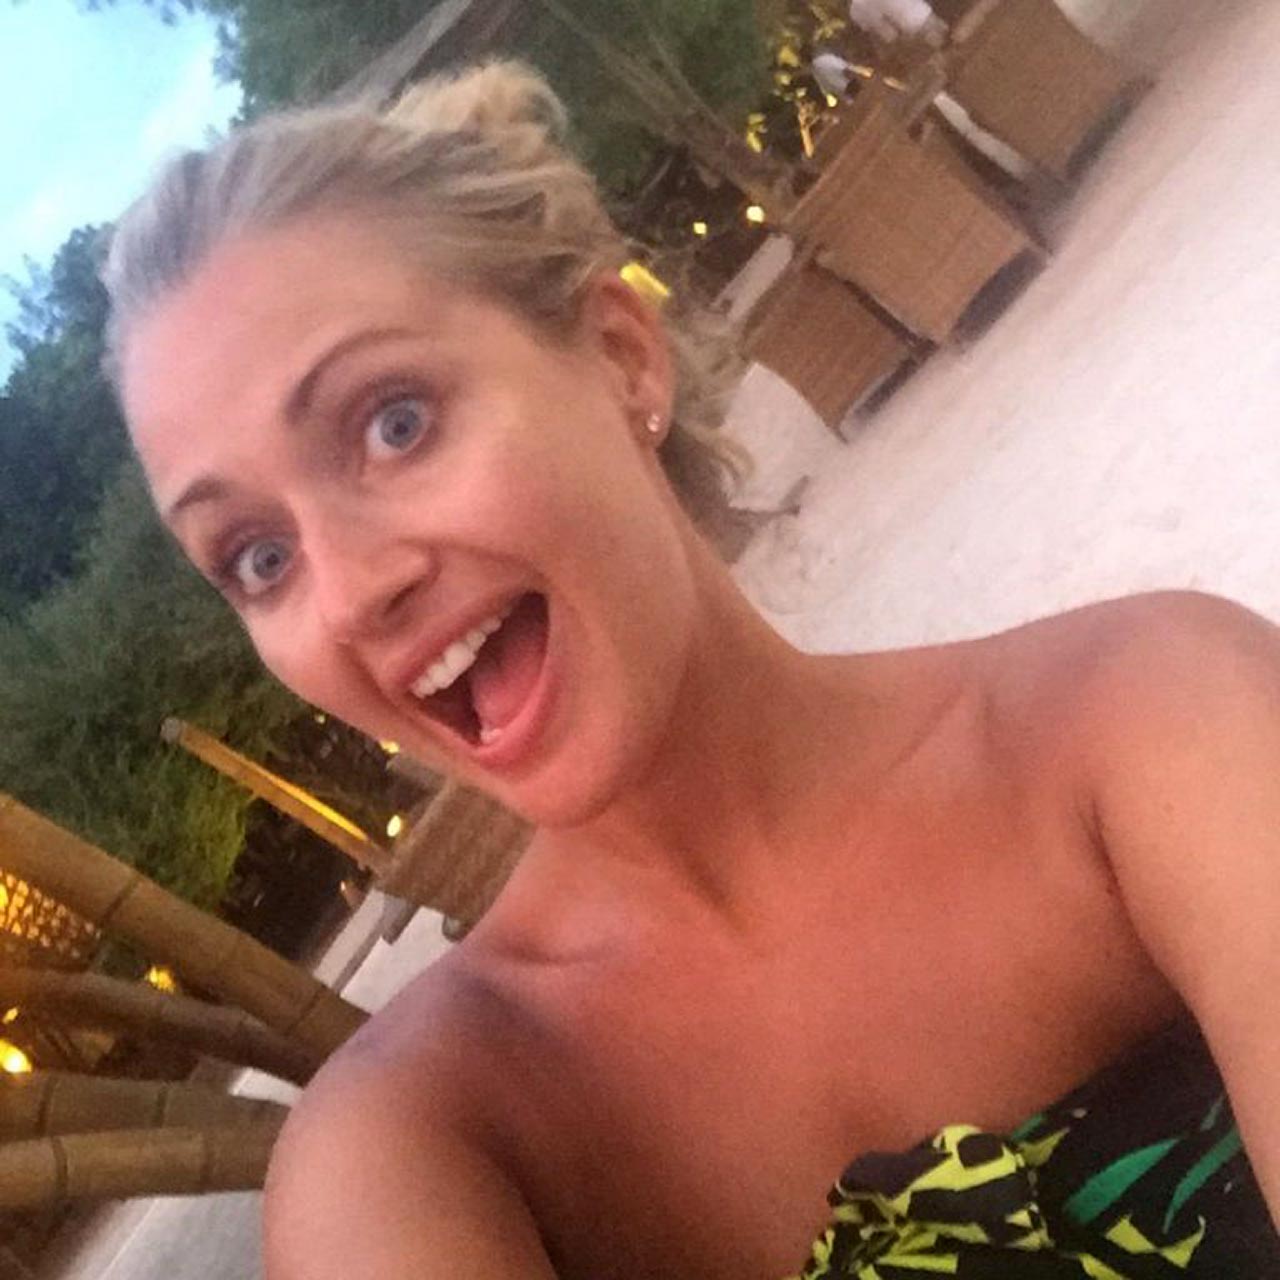 Hayley Mcqueen Leaked Nude Photos � This Tv Host Showed Free Downl image image